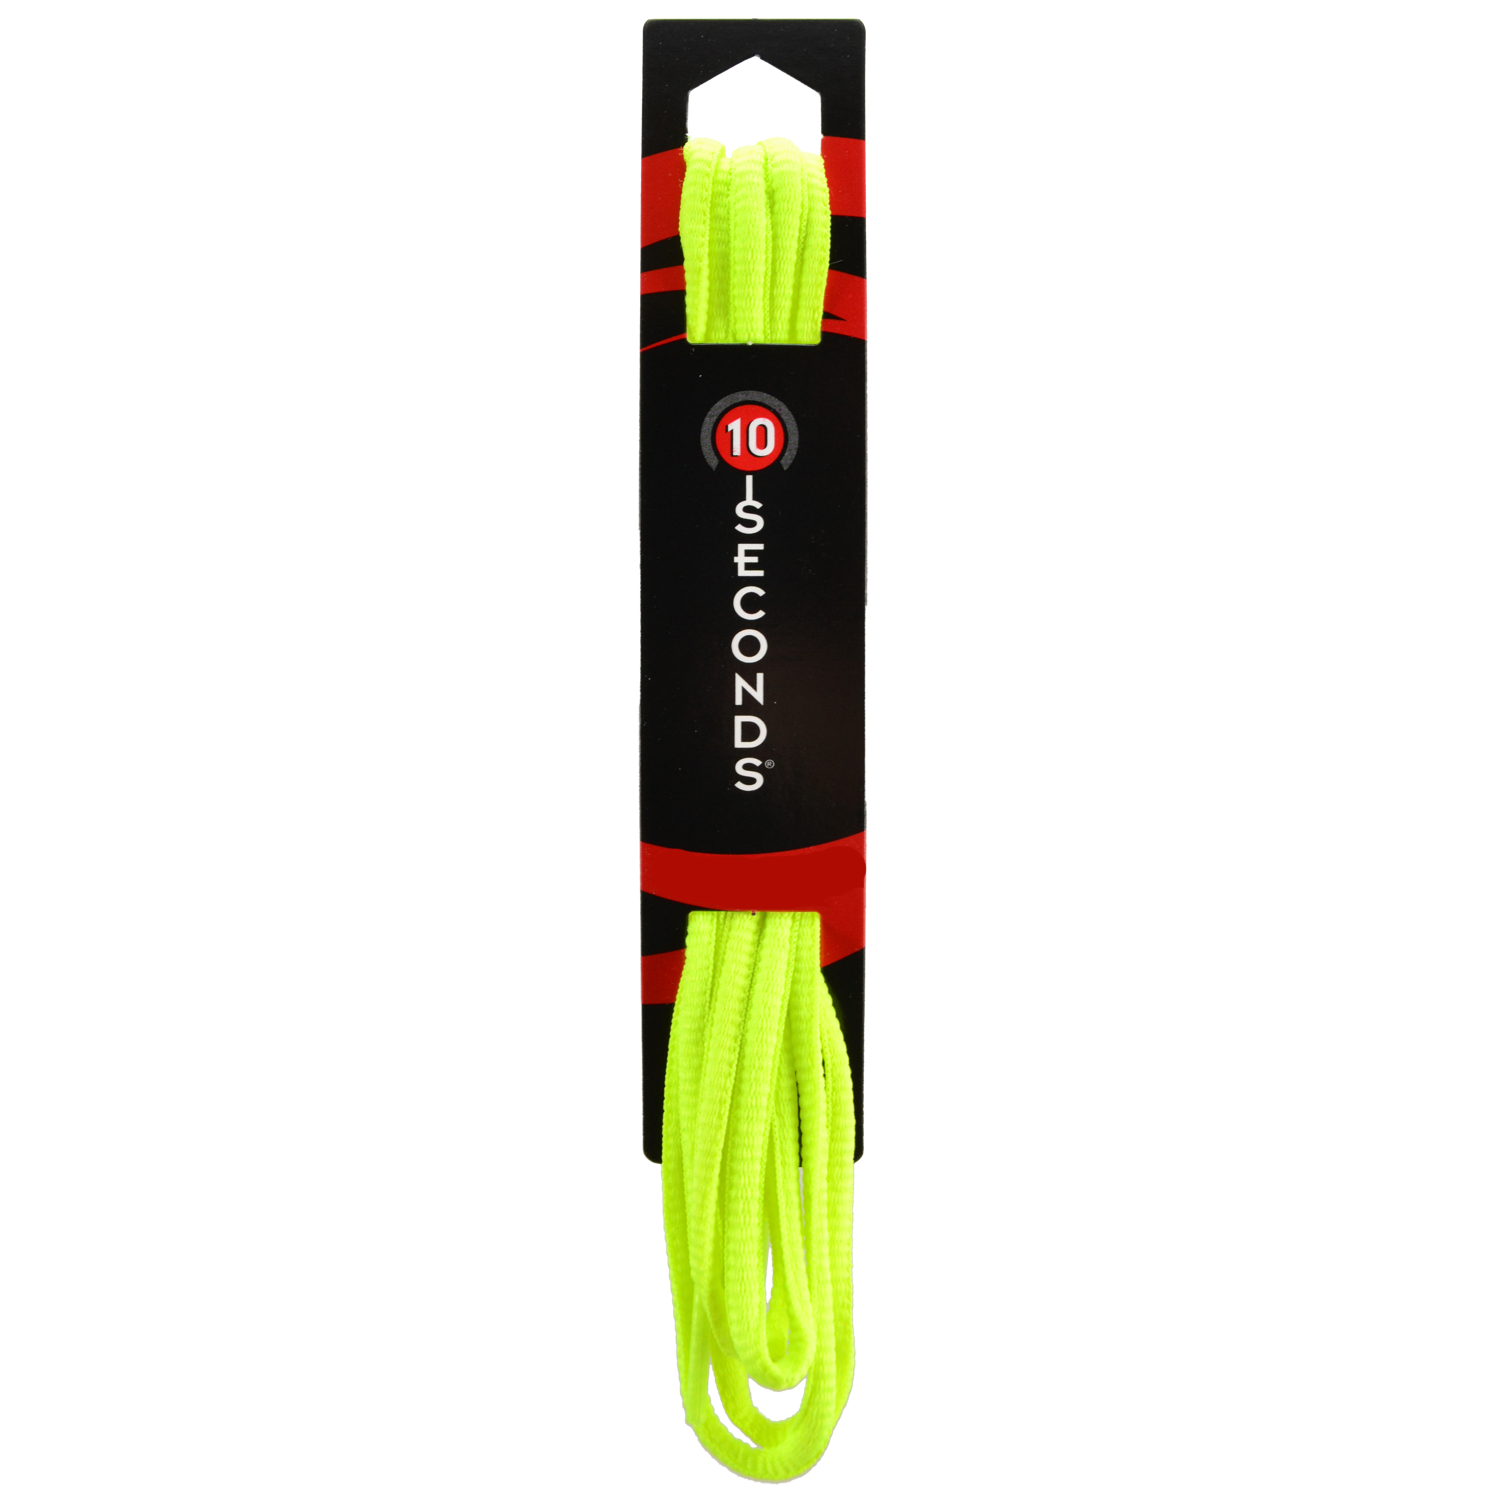 10 Seconds, Classics Oval Athletic Shoelace, Unisex, Neon Yellow